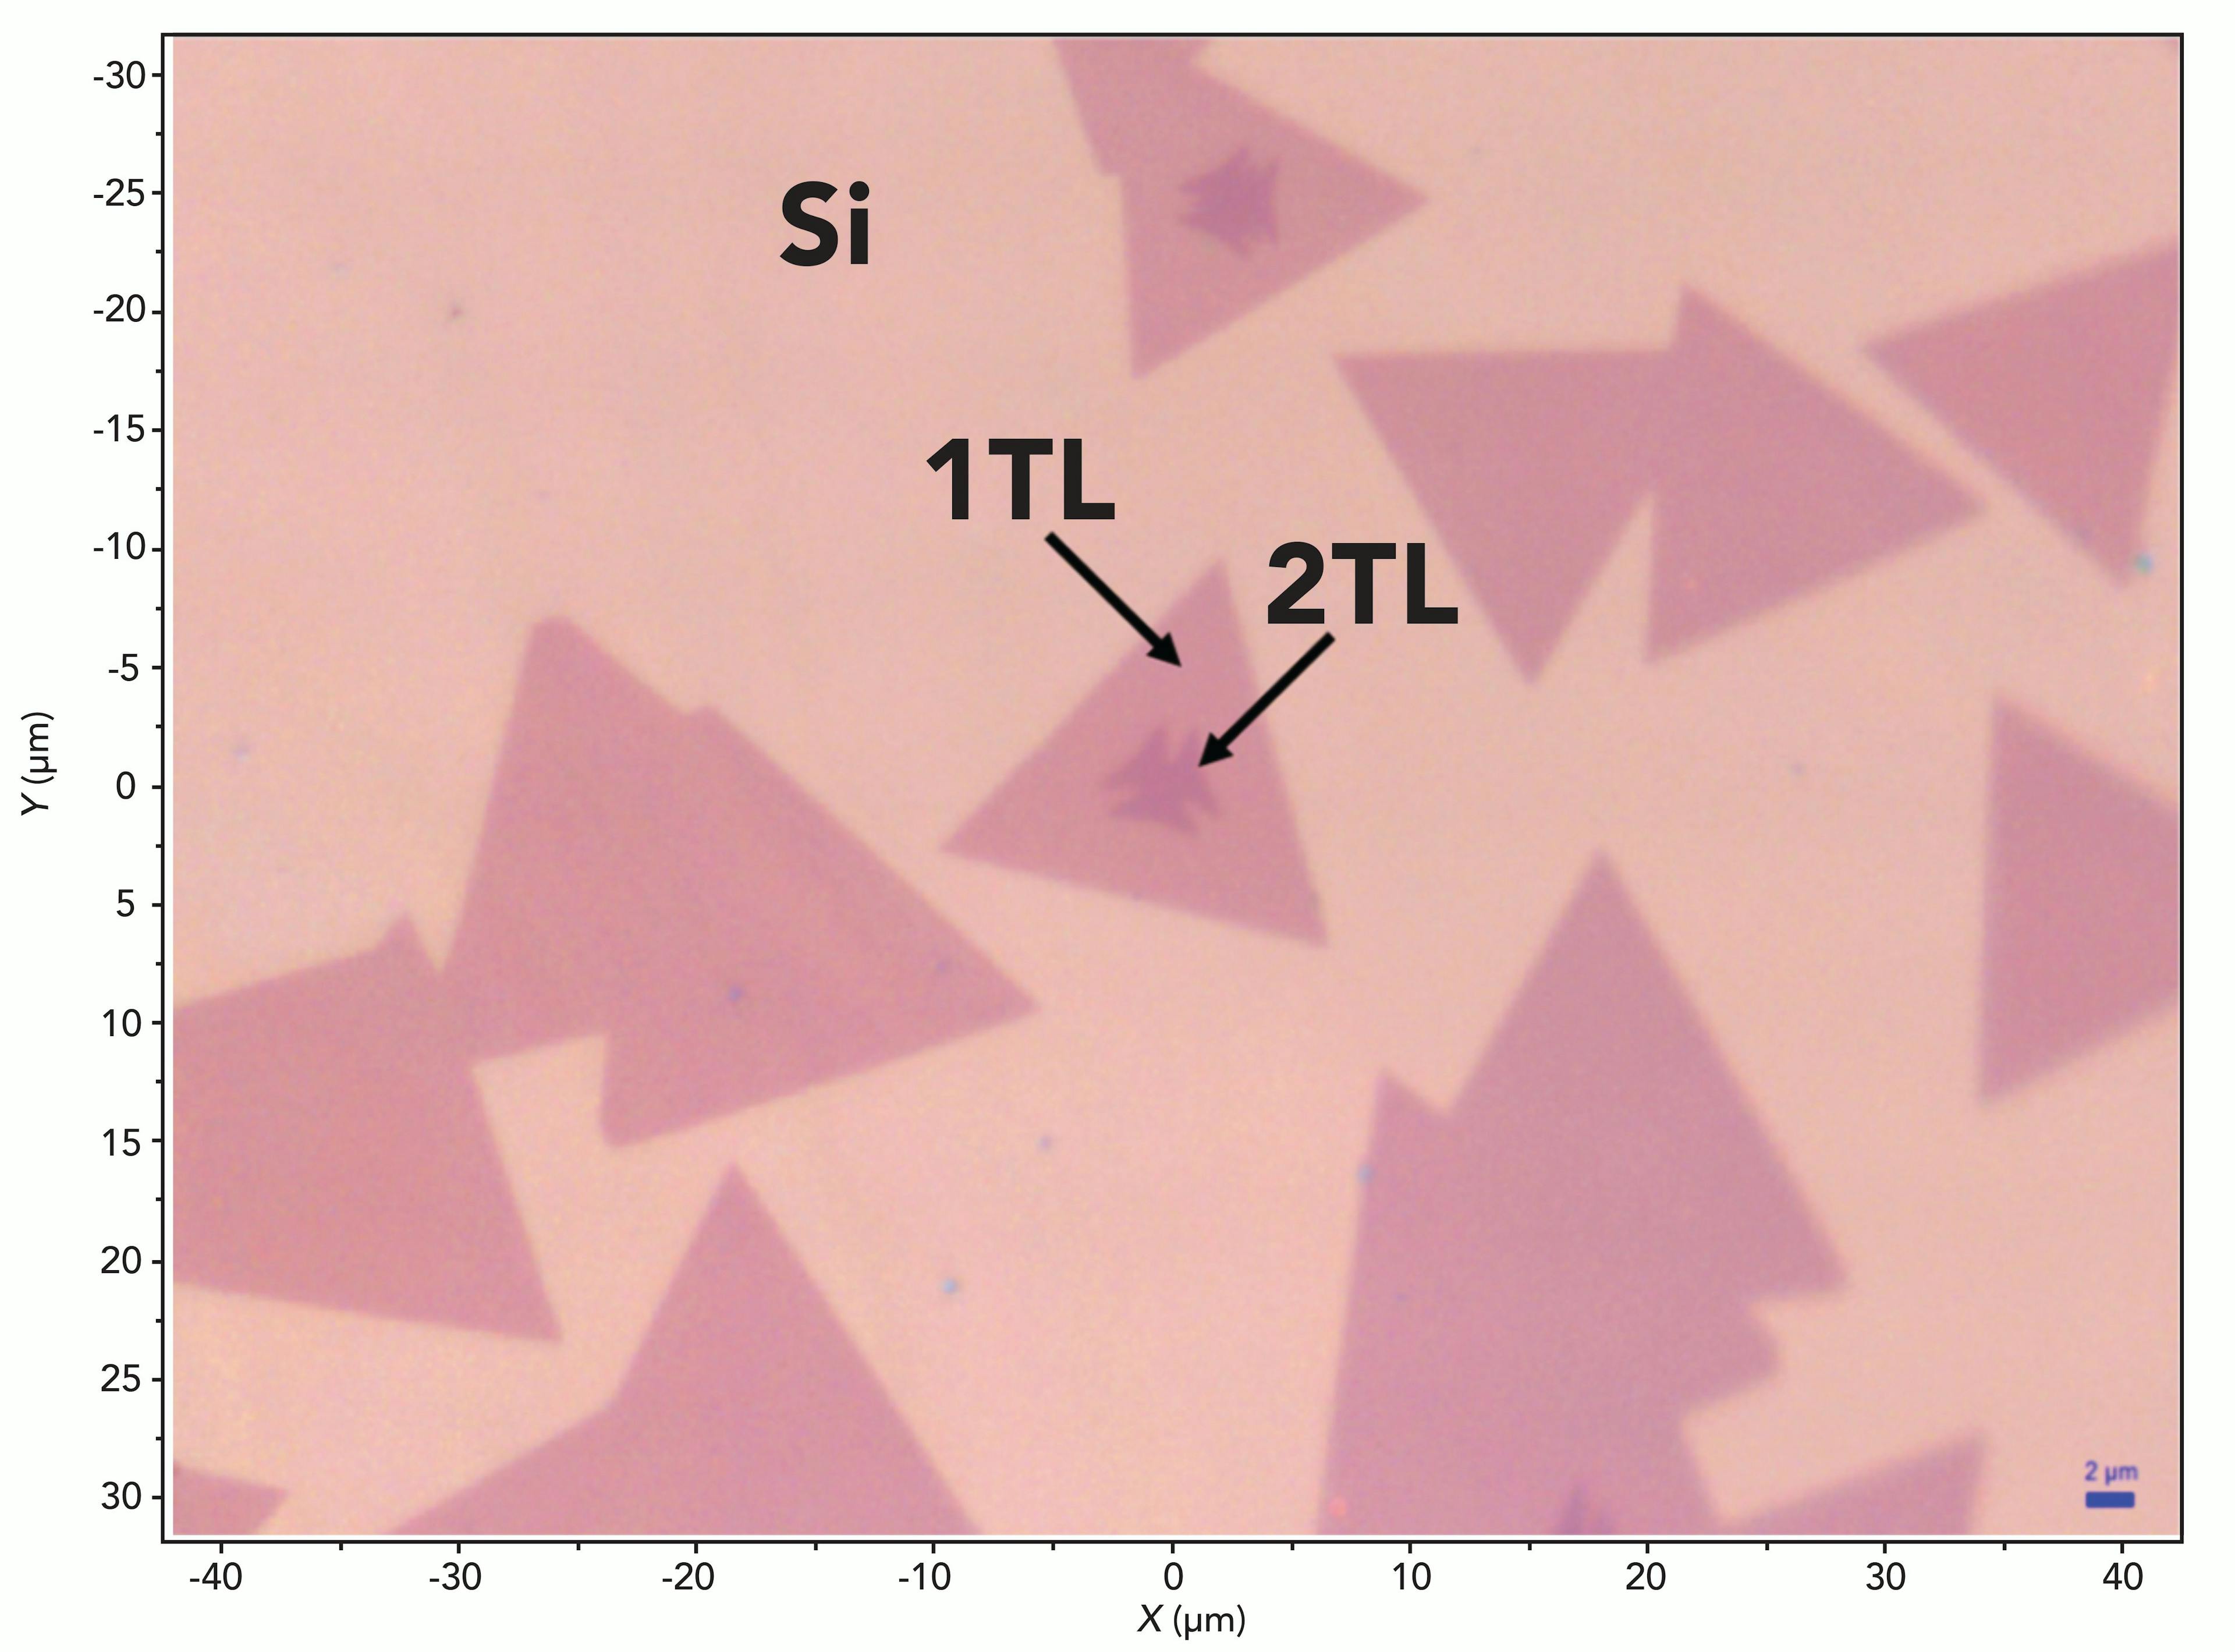 Figure 1: Reflected white light image of MoS2 with single (1TL) and double (2TL) trilayers prepared by chemical vapor deposition on a Si substrate.